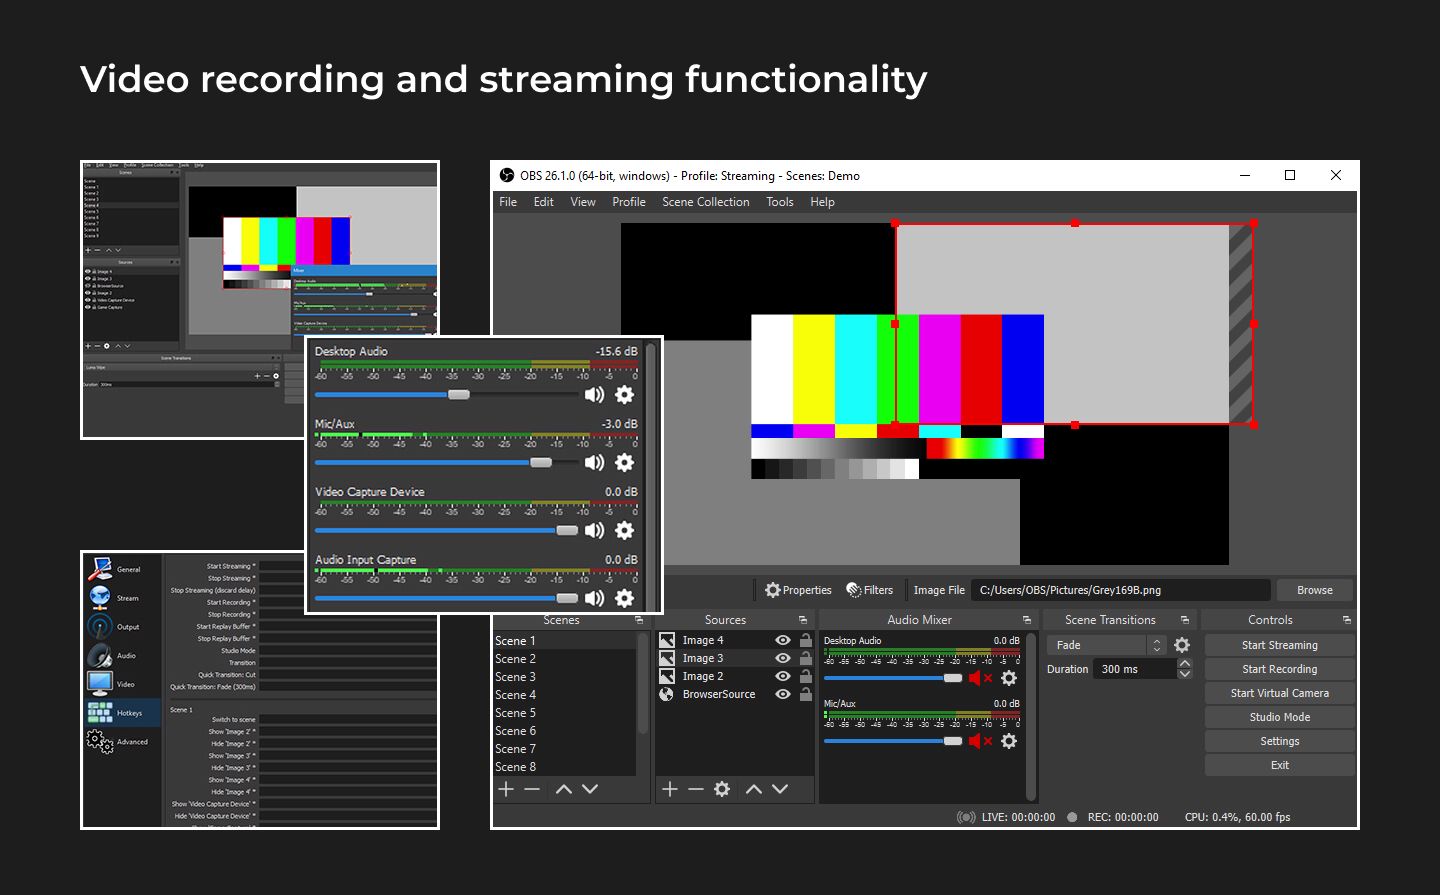 Video recording and streaming functionality